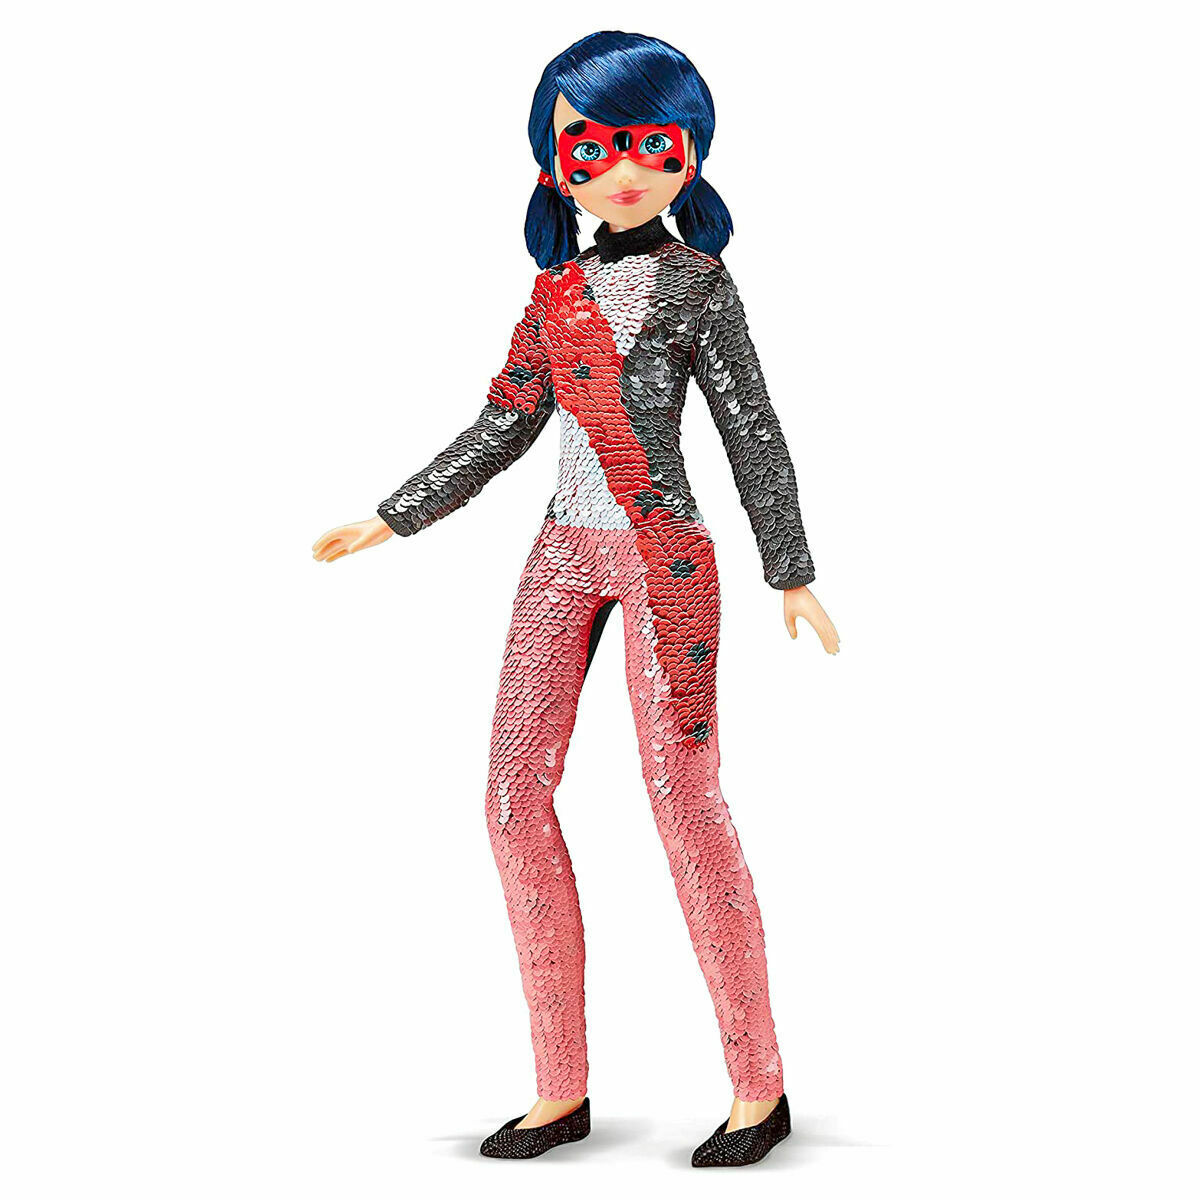 Miraculous Marinette to Ladybug Sequins Doll